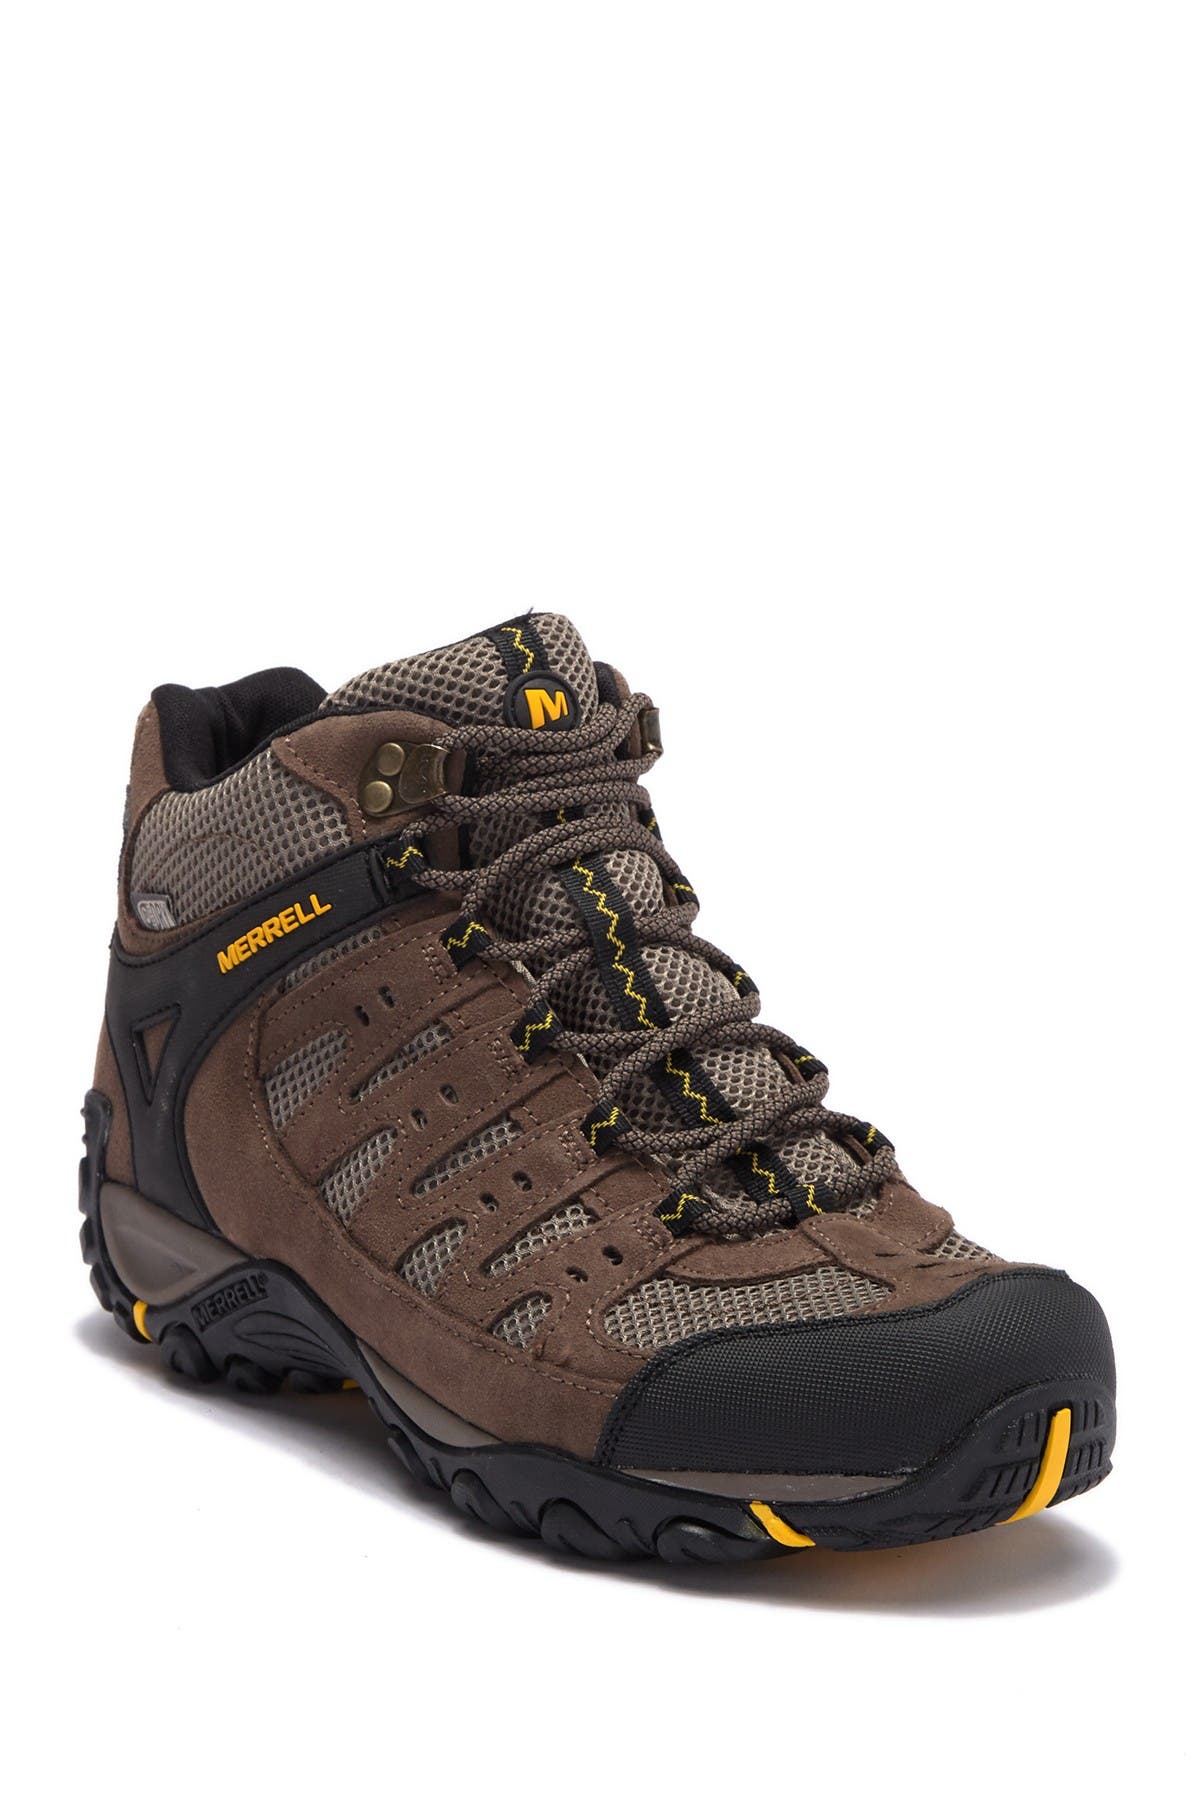 merrell accentor mid mens review